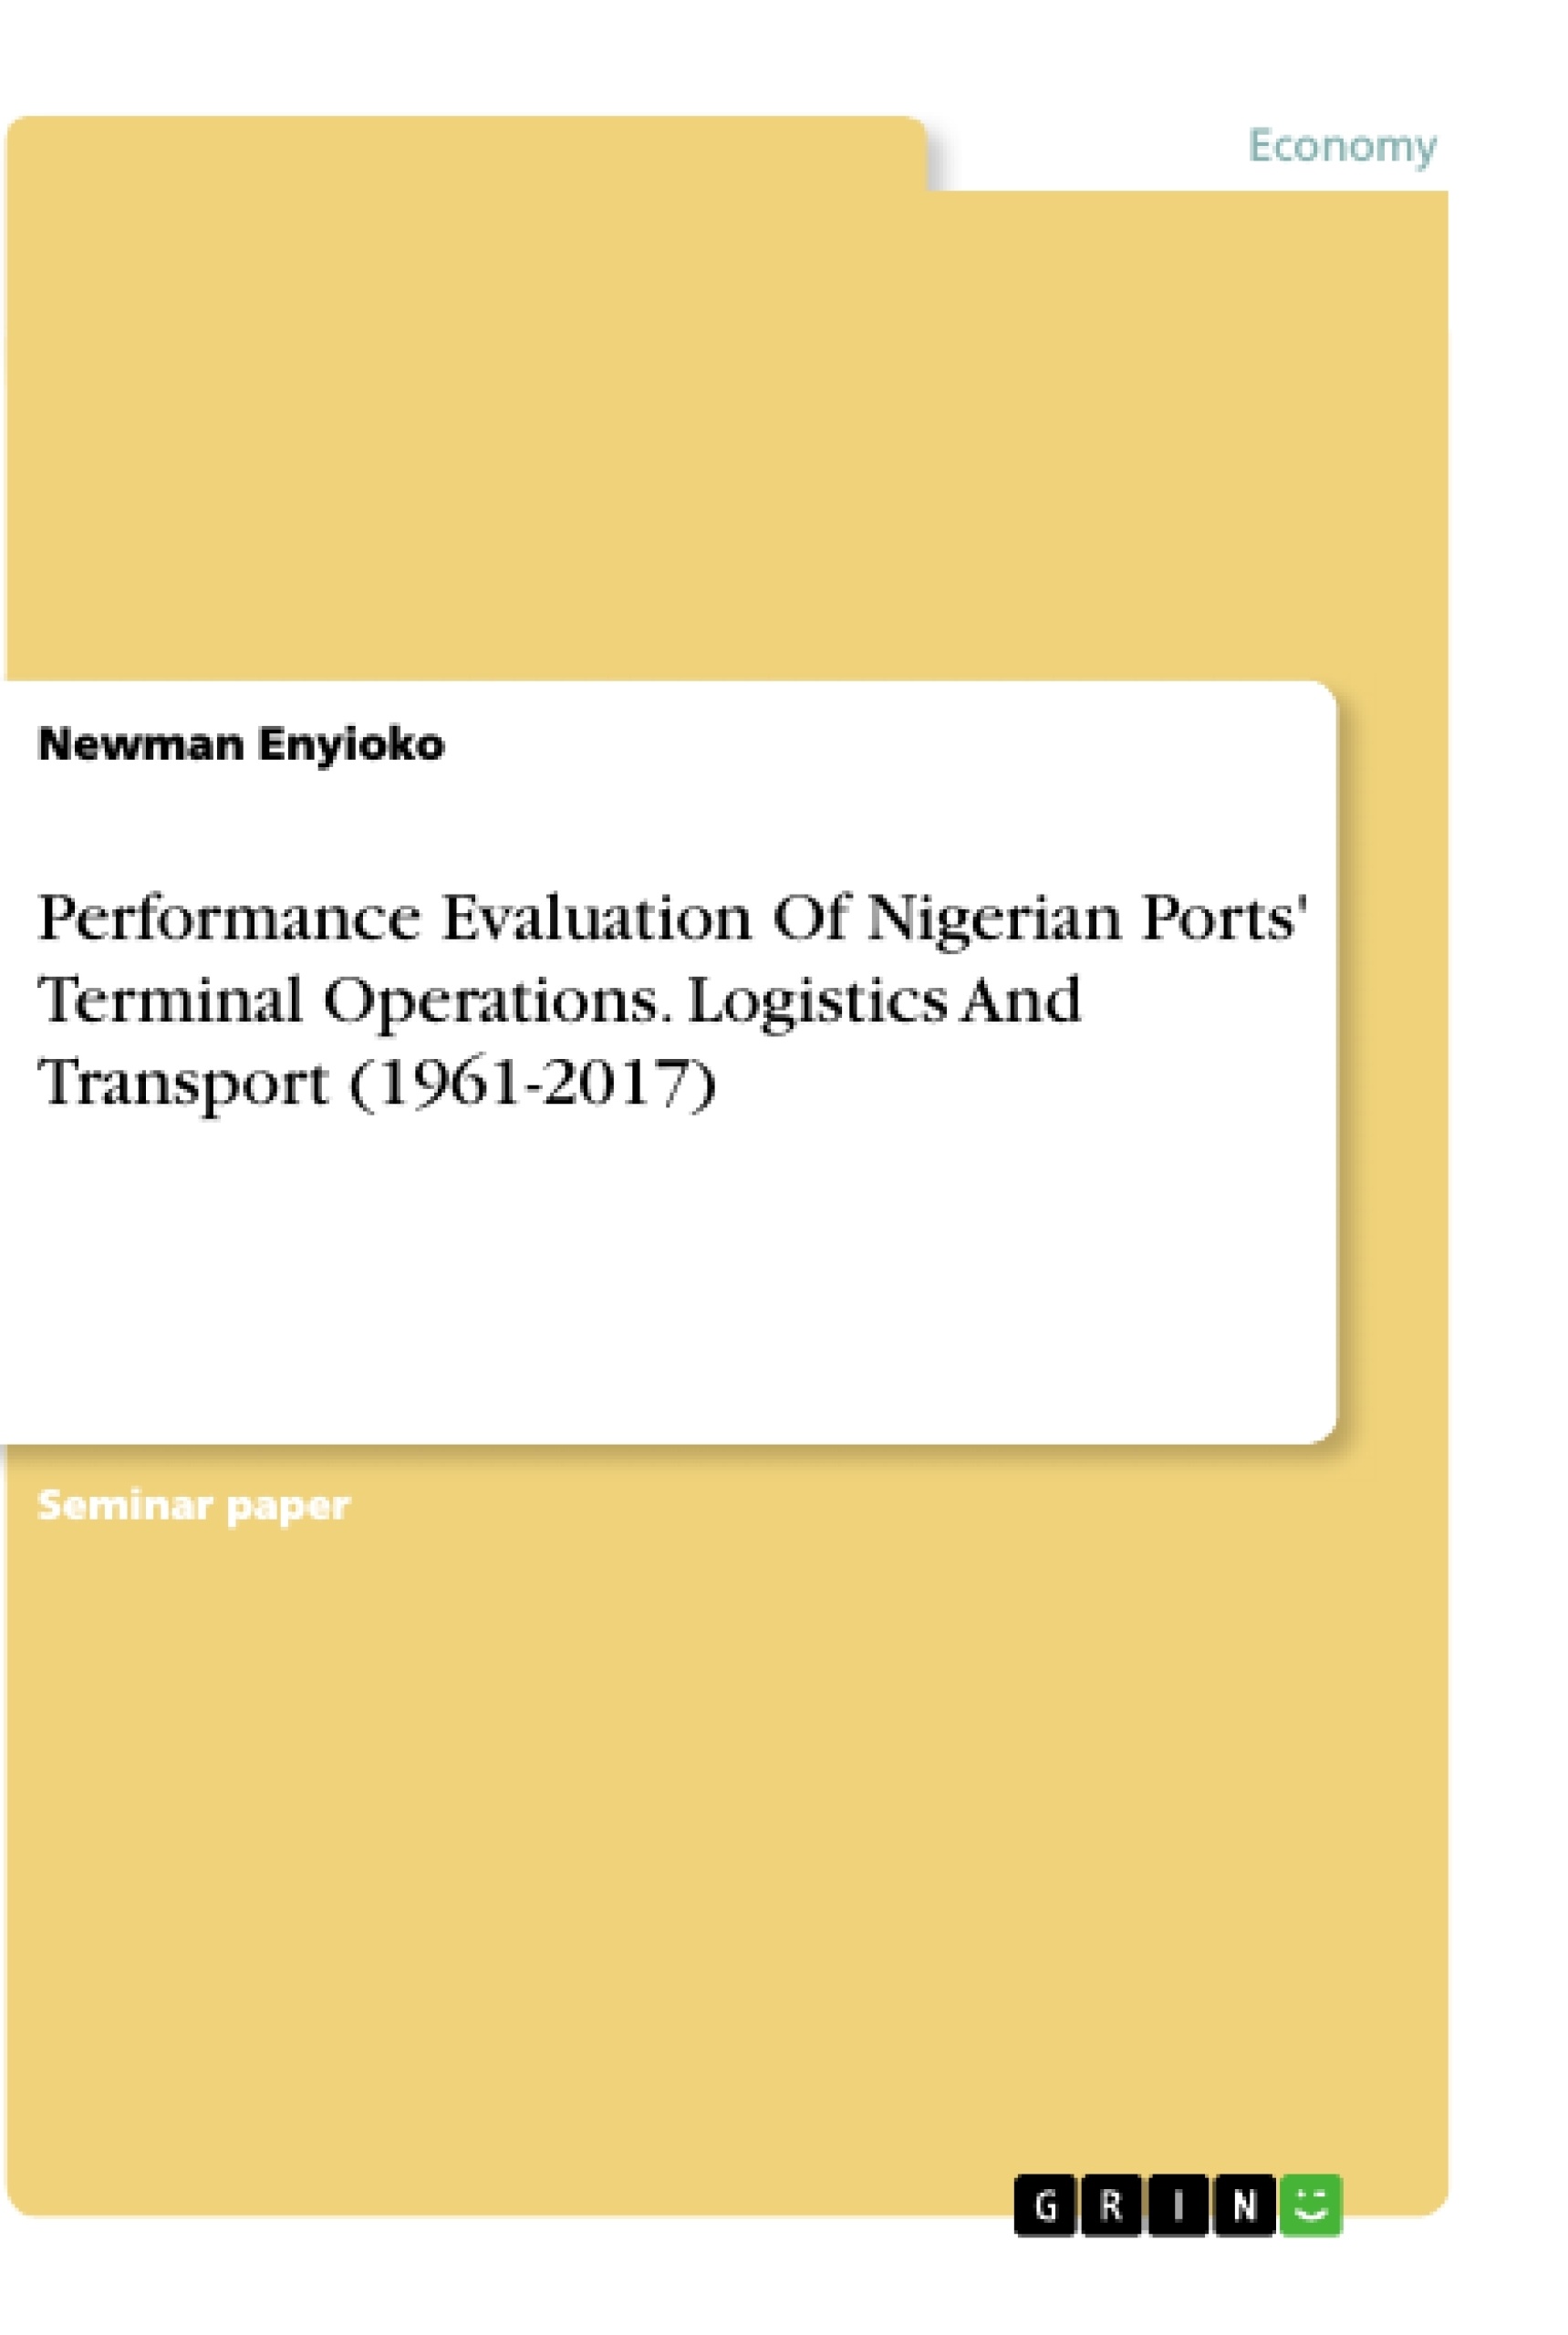 Título: Performance Evaluation Of Nigerian Ports' Terminal Operations. Logistics And Transport (1961-2017)